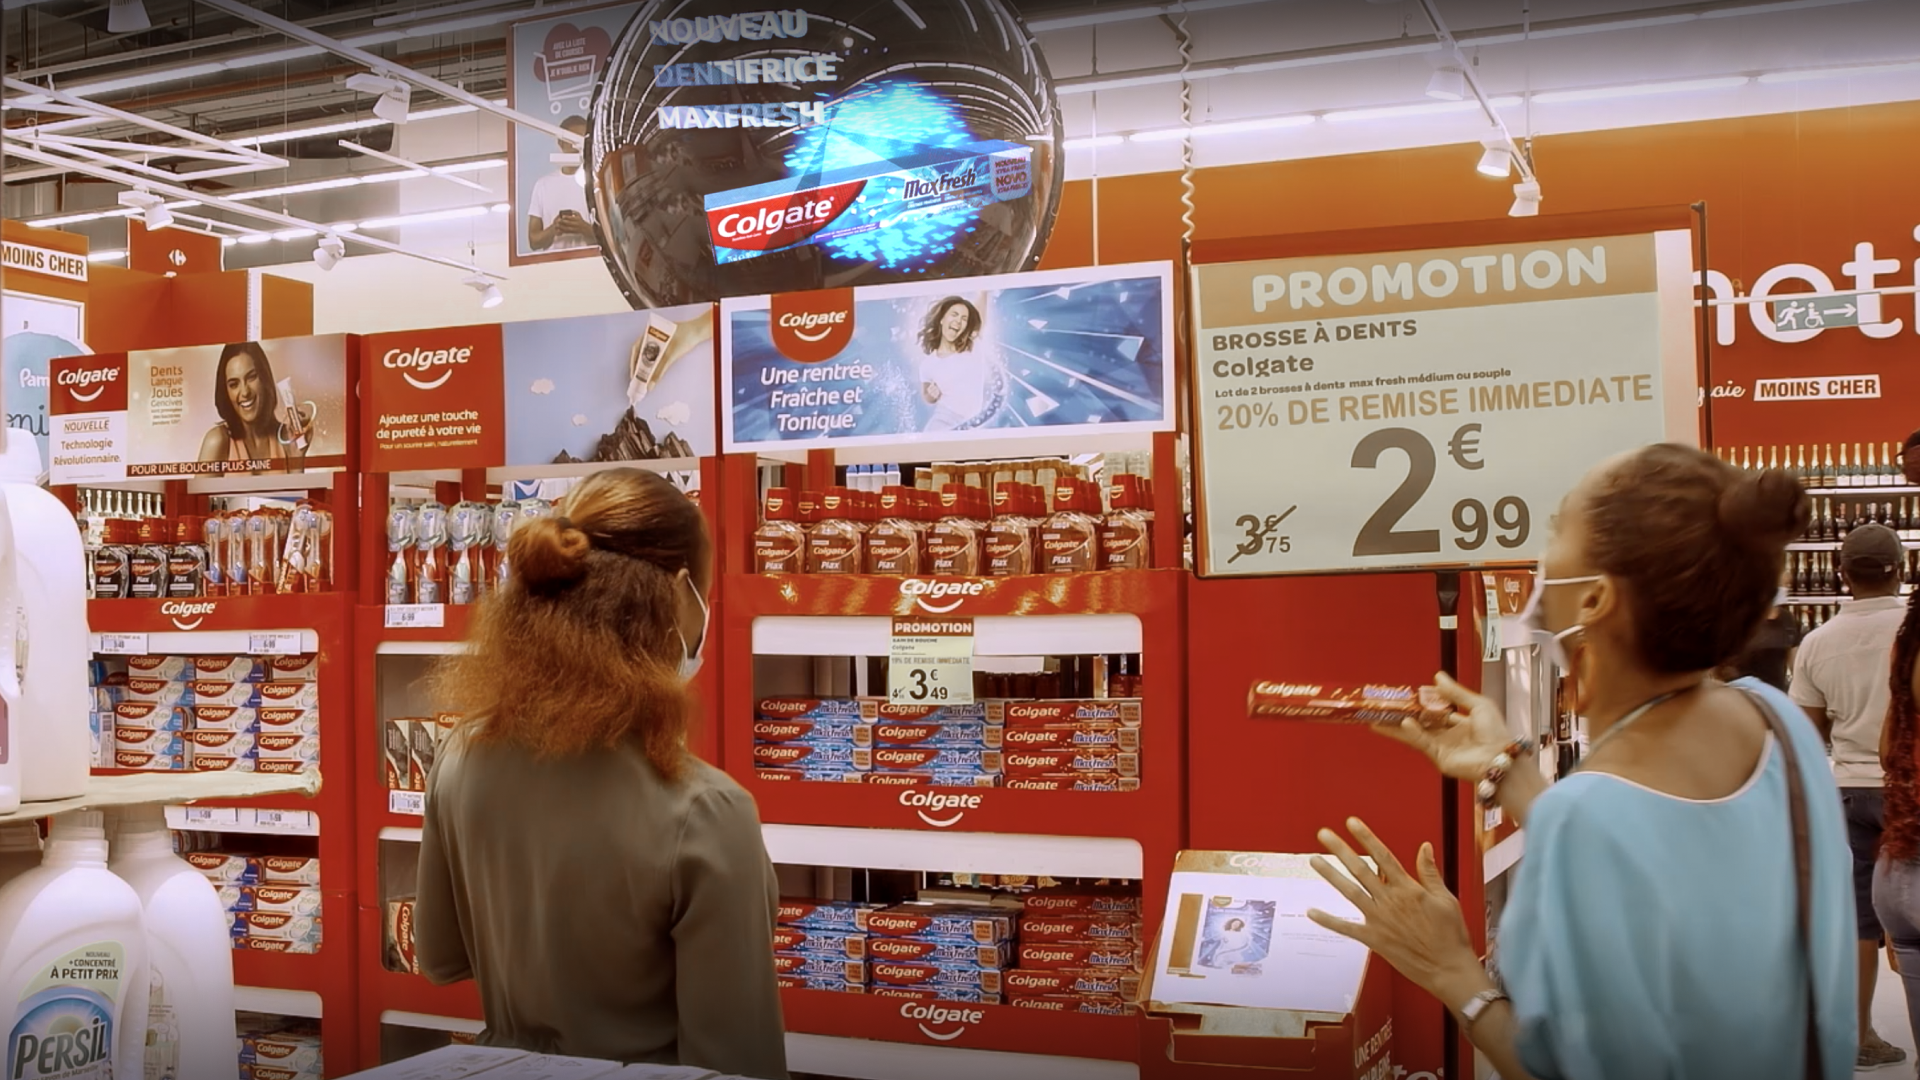 Colgate Uses Holographic Displays to Promote its New Product - HYPERVSN